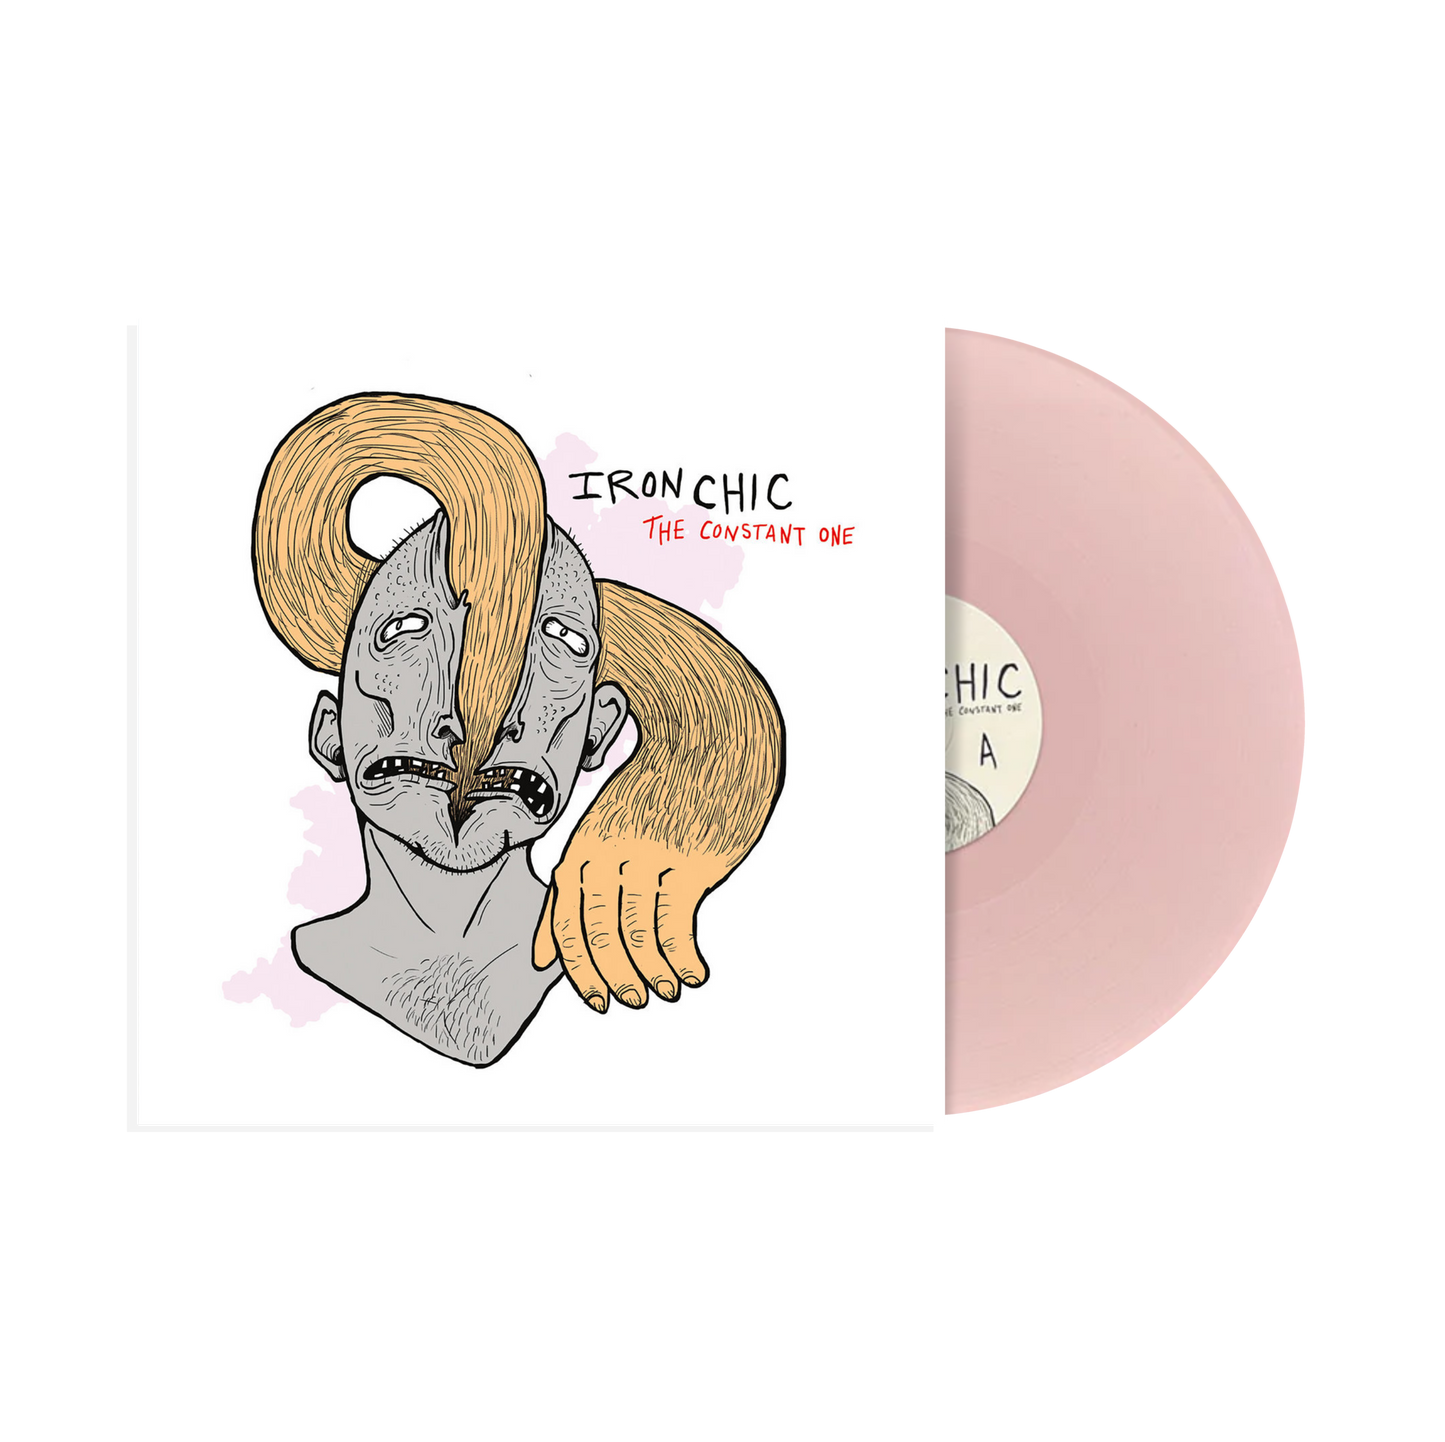 Iron Chic "The Constant One" LP